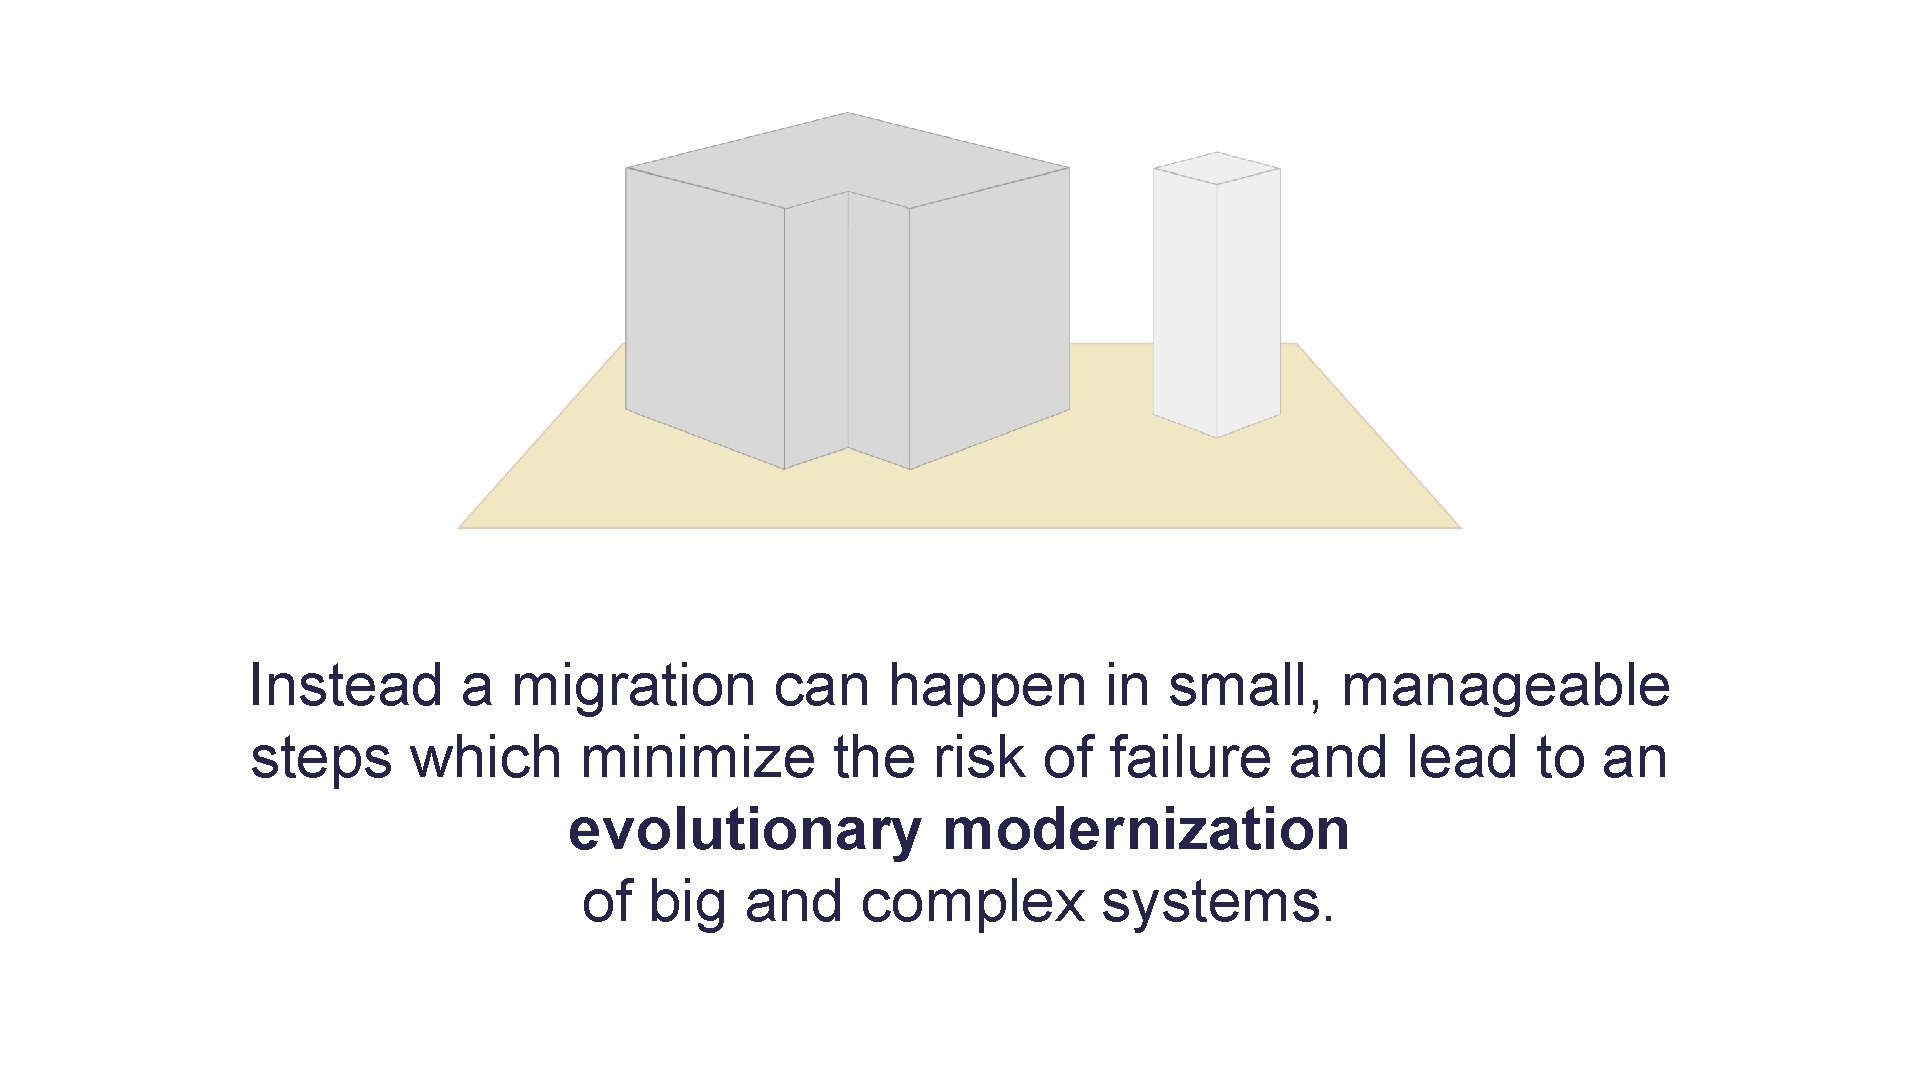 Instead a migration can happen in small, manageable steps which minimize the risk of